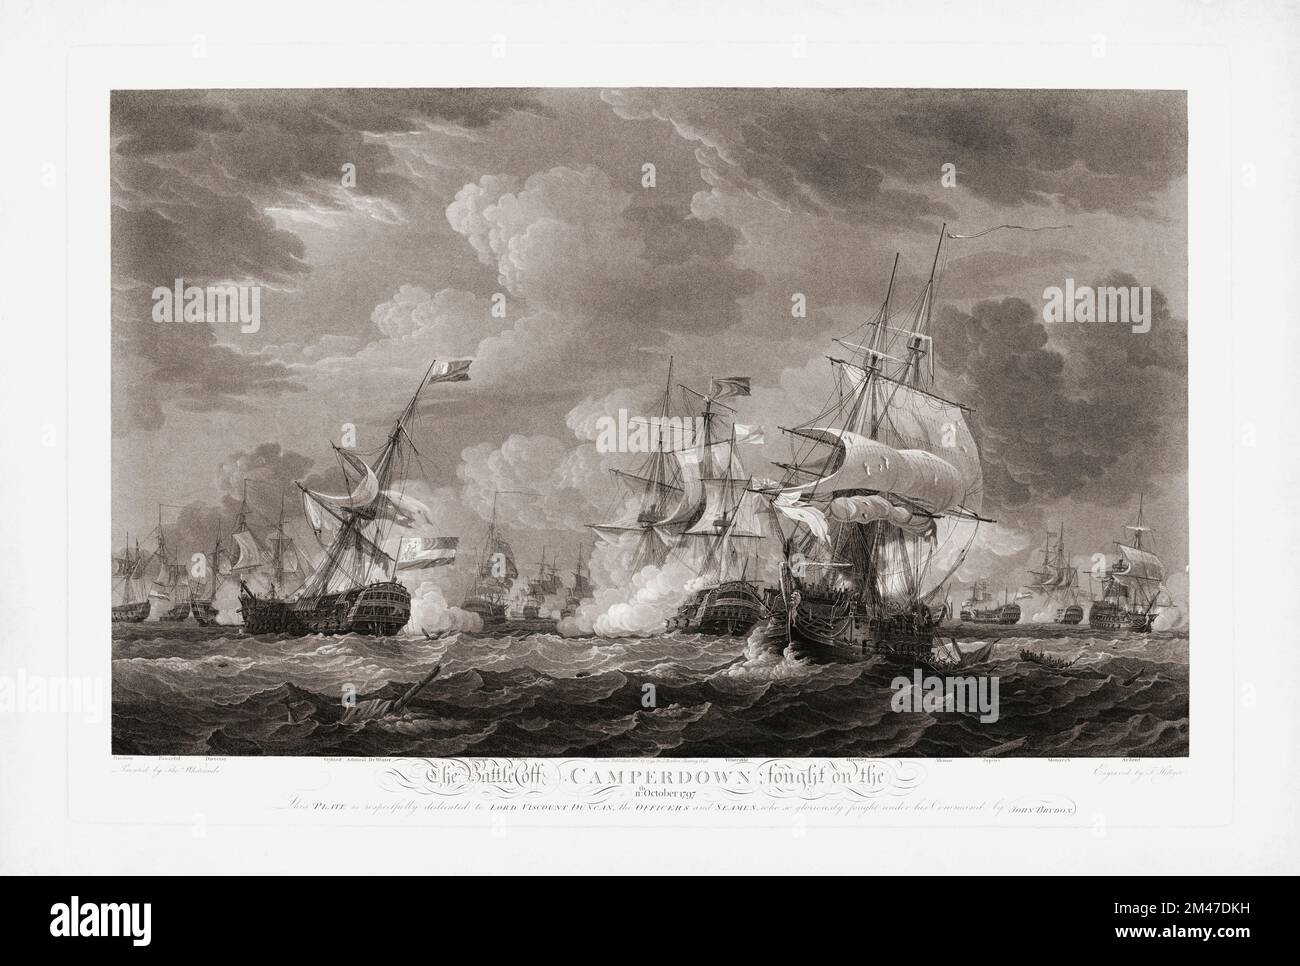 The Battle of Camperdown - Kamperduin in Dutch - 11 October 1797, during the French Revolutionary Wars.  It was fought between the British North Sea Fleet and a Batavian Navy fleet.  The British prevailed.  After a contemporary print by Thomas Hellyer from the painting by Thomas Whitcombe. Stock Photo